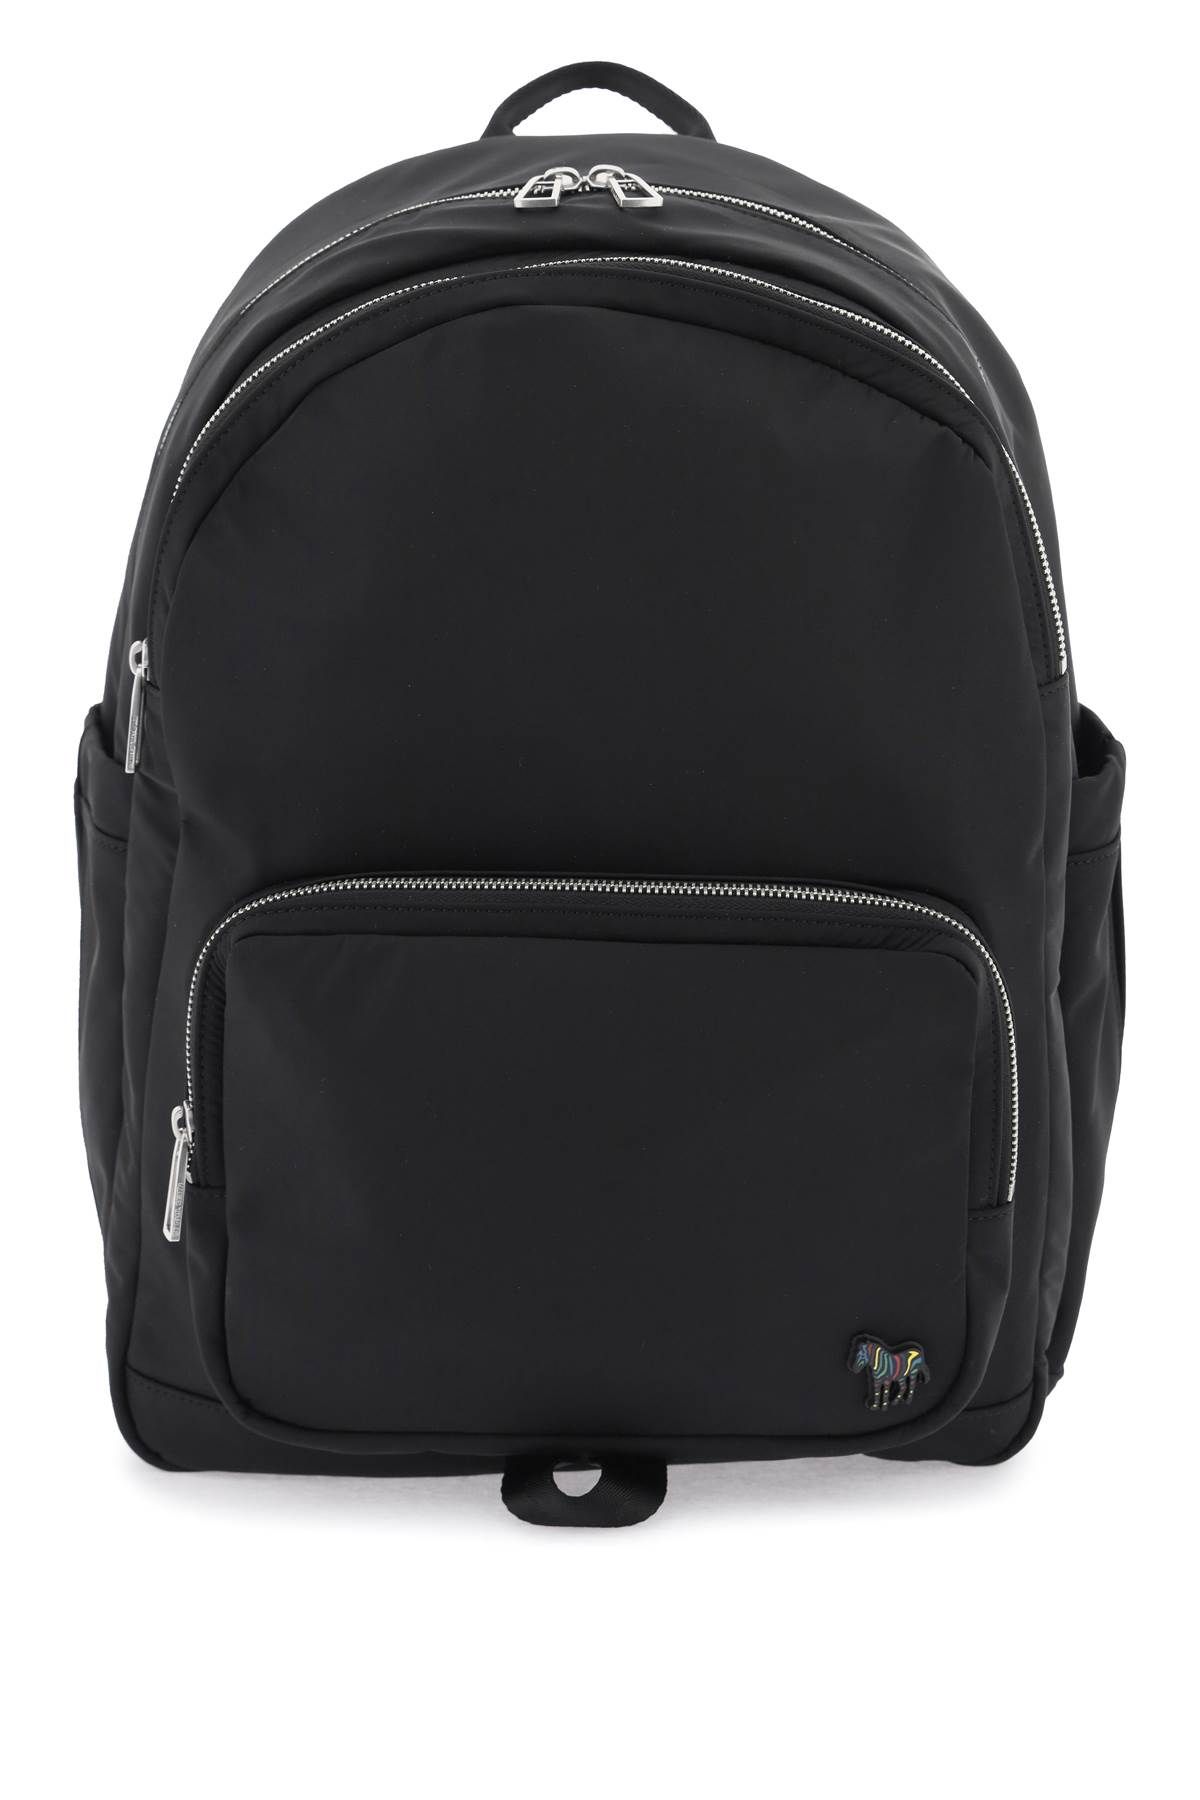 PS PAUL SMITH nylon backpack with zebra detail